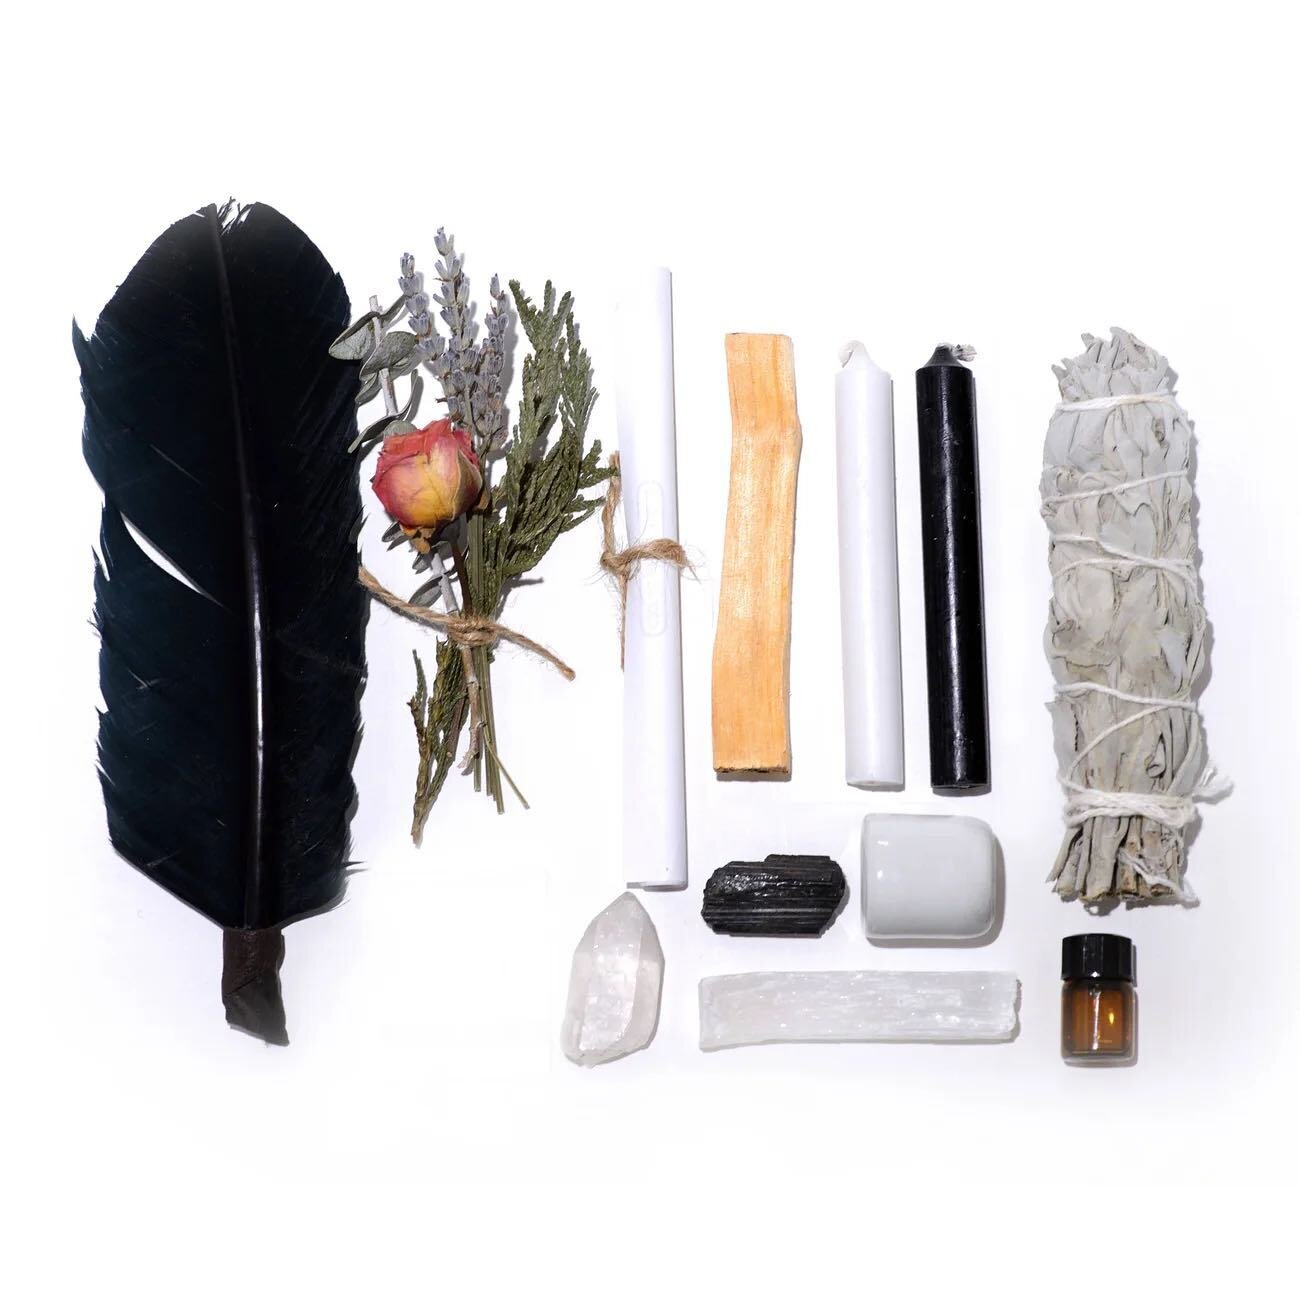 Moon Ritual Kit by J. Southern Studio - HAPPY HALLOWEEN! 

This Moon Ritual Kit is the perfect tool for any intention setting ceremony. It's expansive and versatile ingredients can be used for both banishing, and enticing, rituals or spells. Need mon